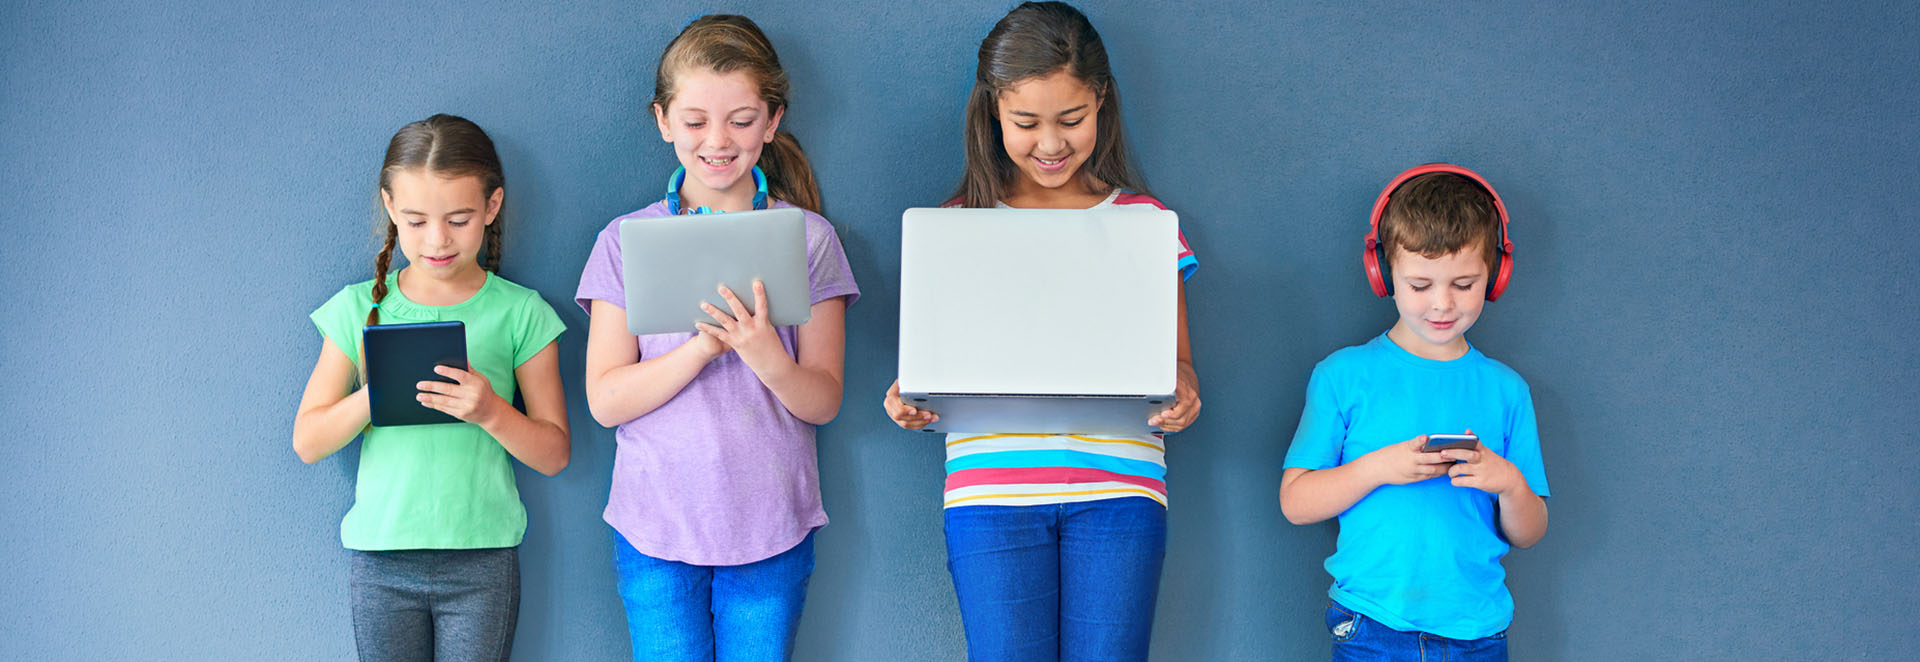 Studio shot of a group of kids using wireless technology against a blue background